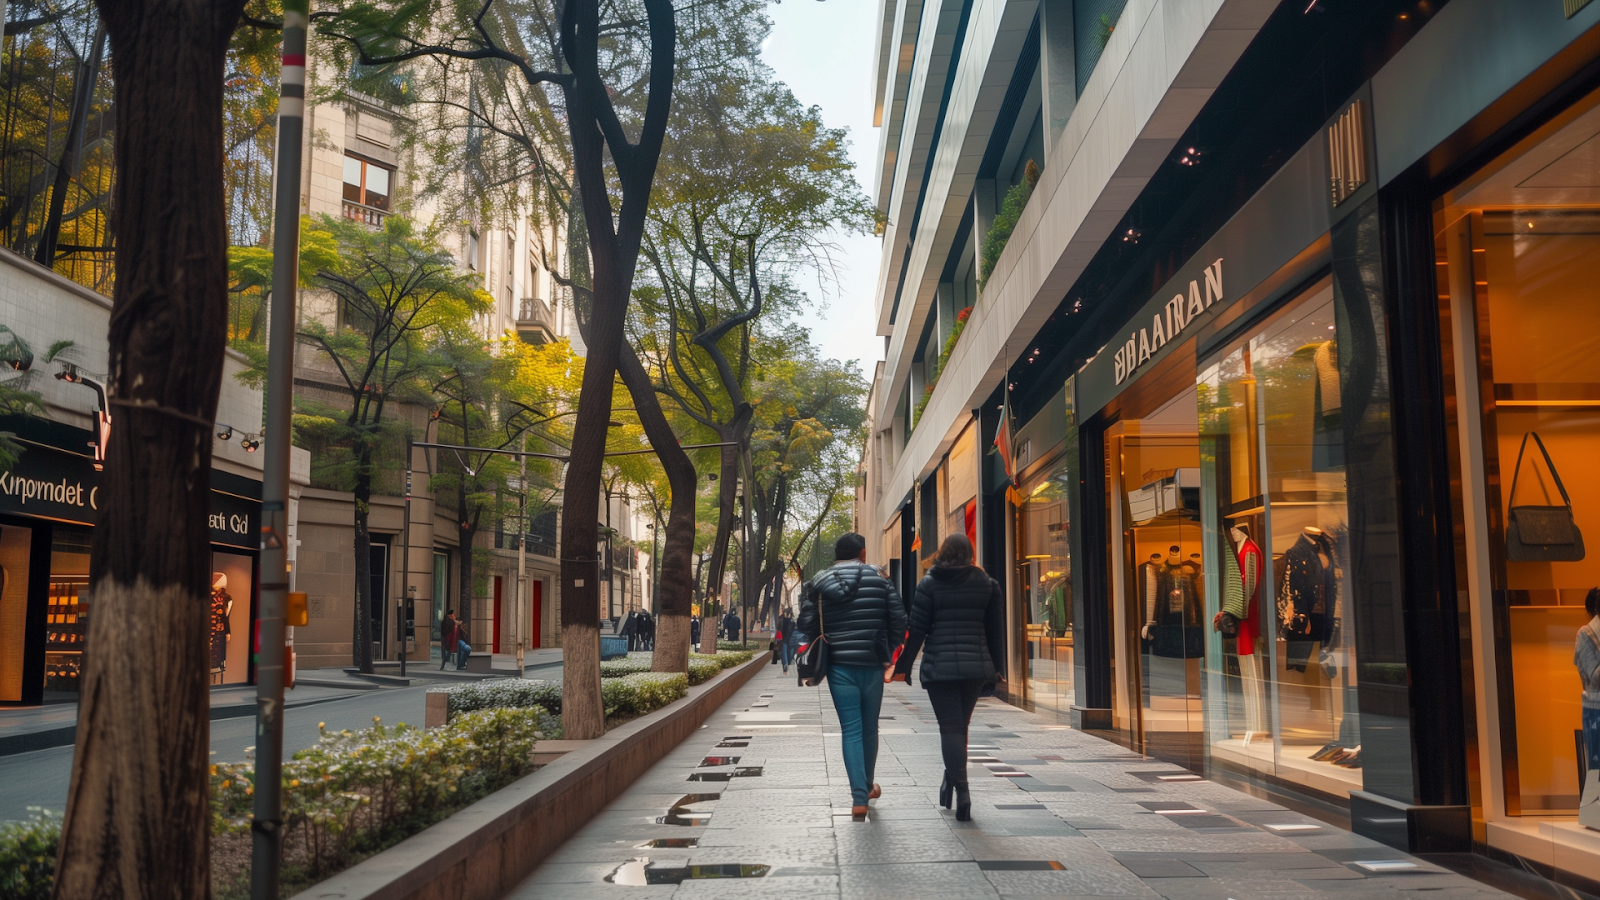 Luxury shopping street in Polanco, Mexico City, with shoppers browsing designer stores.